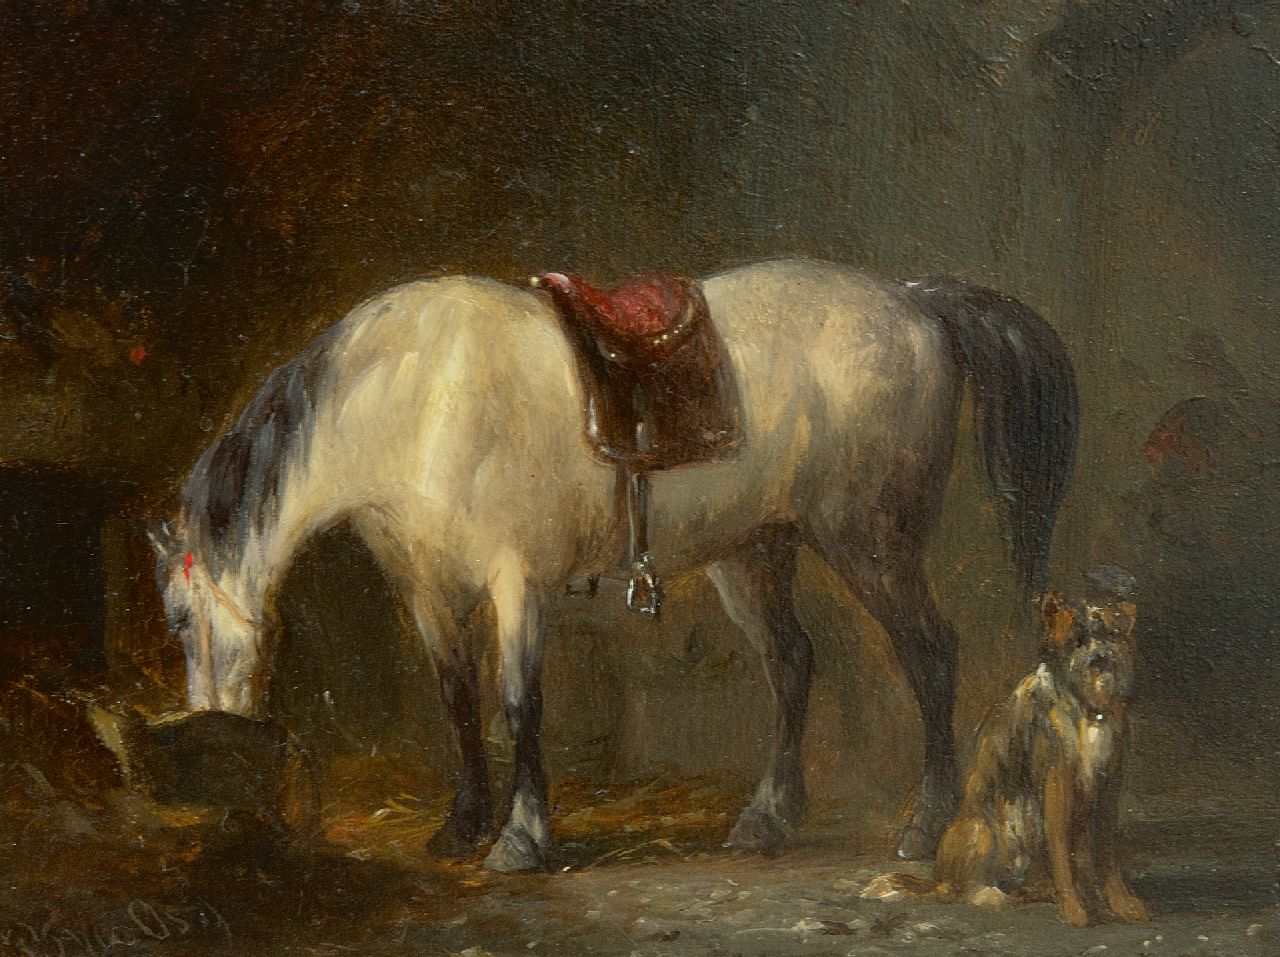 Os P.F. van | Pieter Frederik van Os, In the stable, oil on panel 9.1 x 12.2 cm, signed l.l.